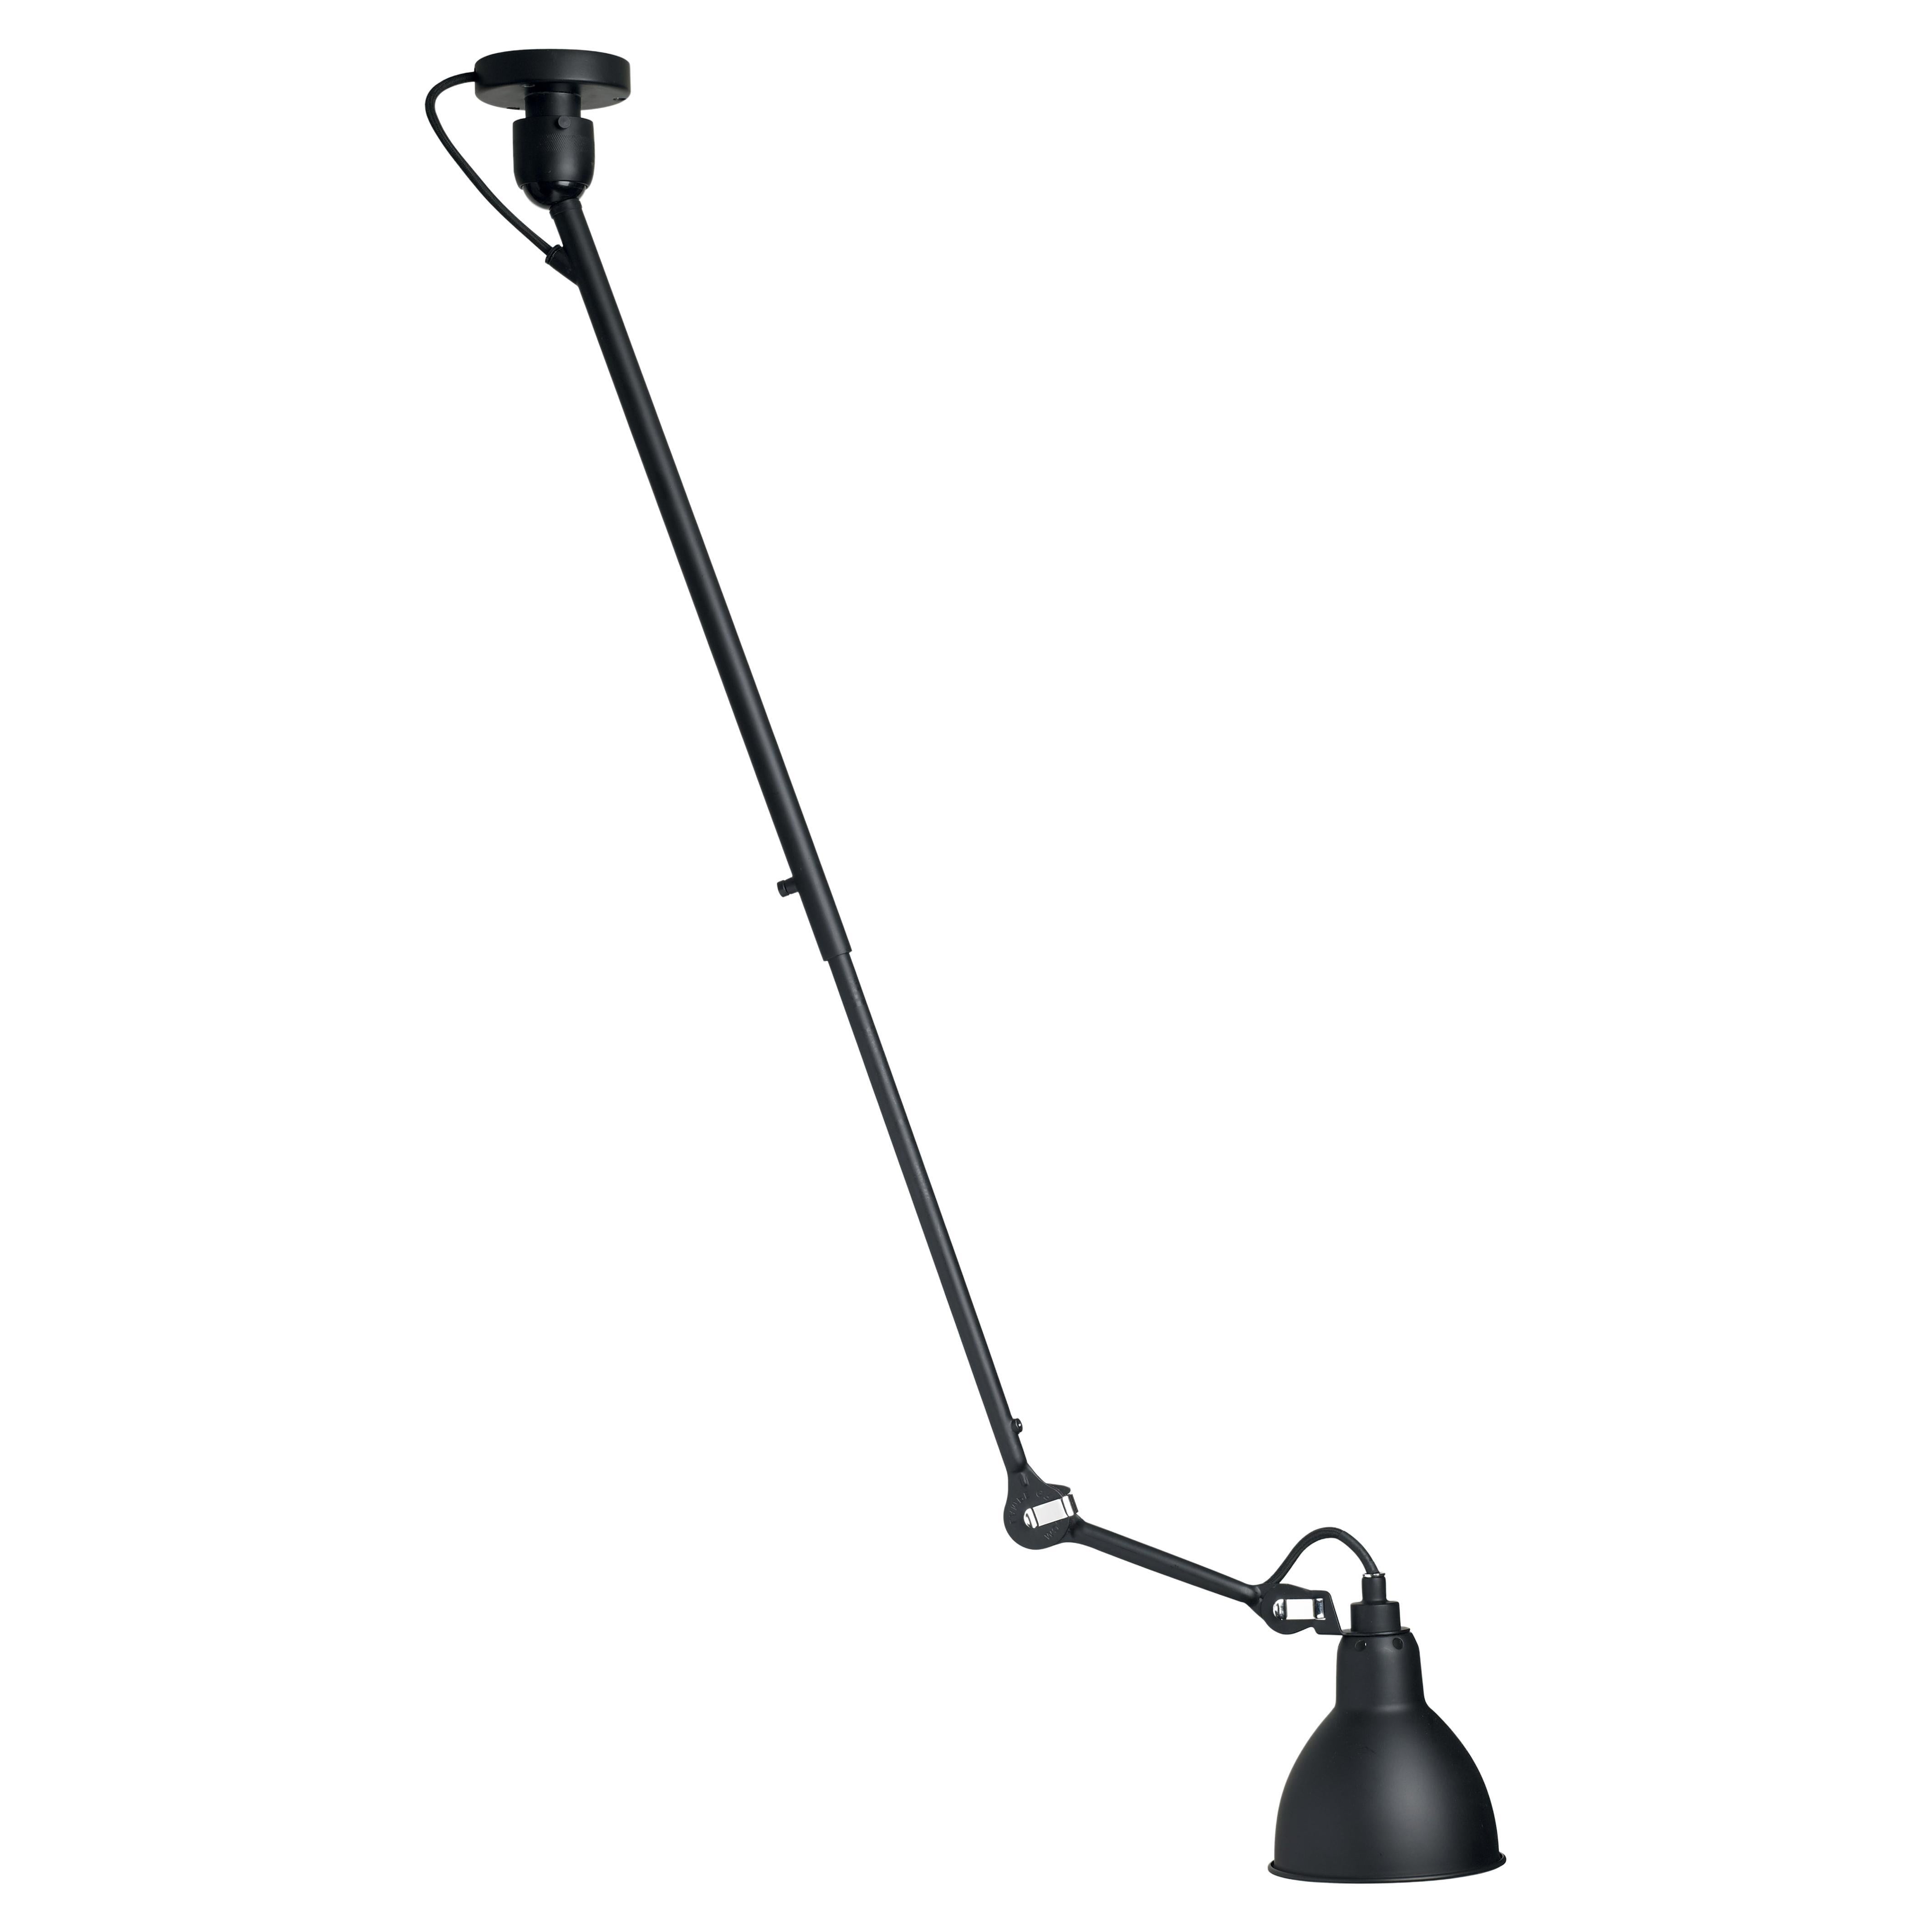 DCW Editions La Lampe Gras N°302 Pendant Light in Black Arm and Black Shade